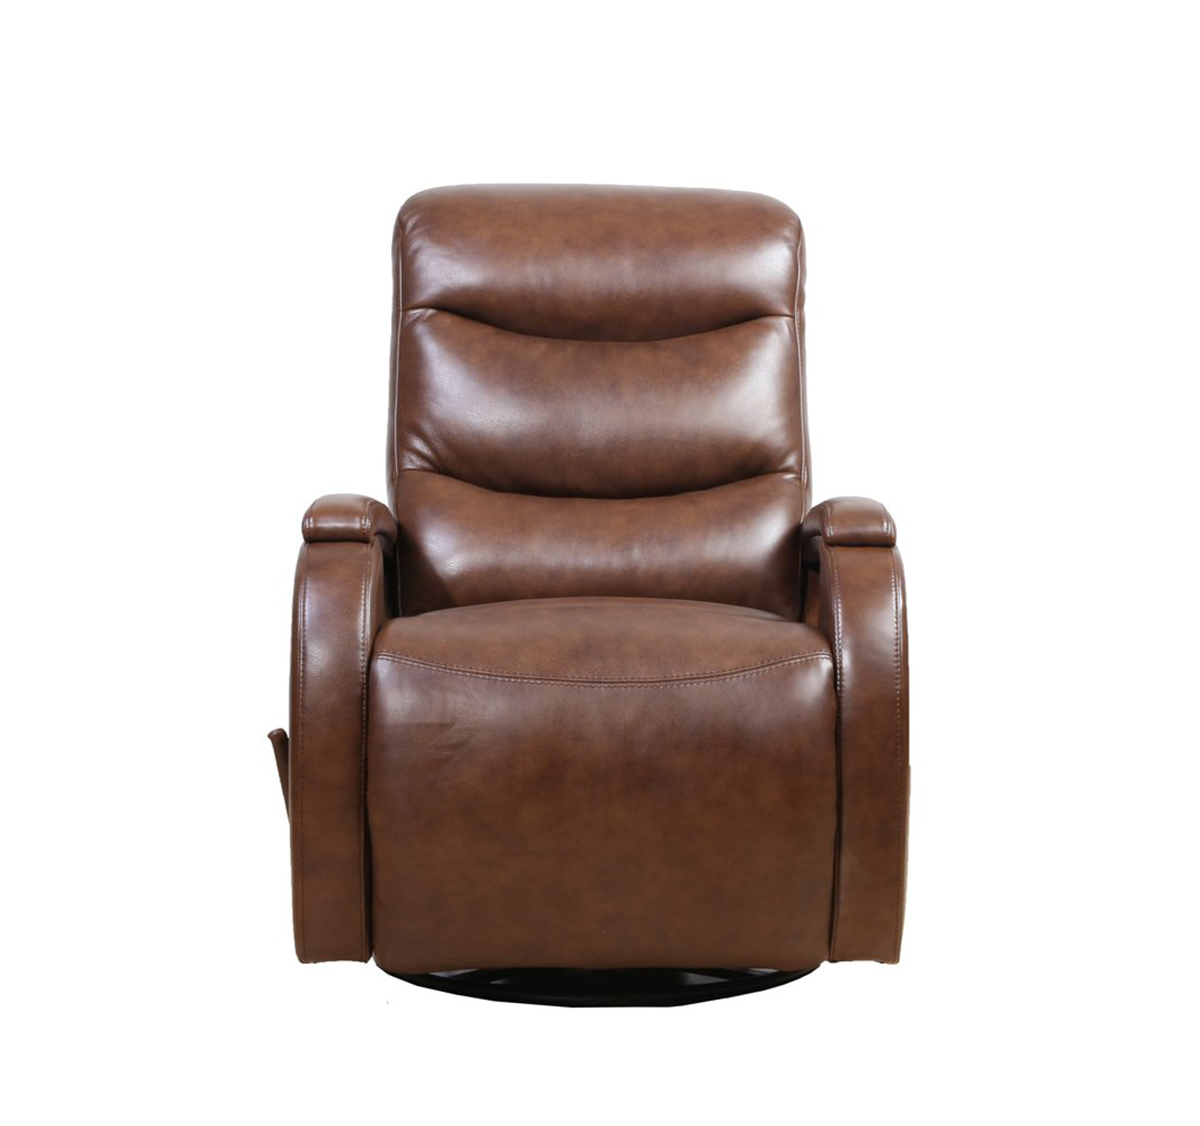 Barcalounger Jonas Swivel Glider Recliner Chair - Wenlock Double Chocolate/Leather Match